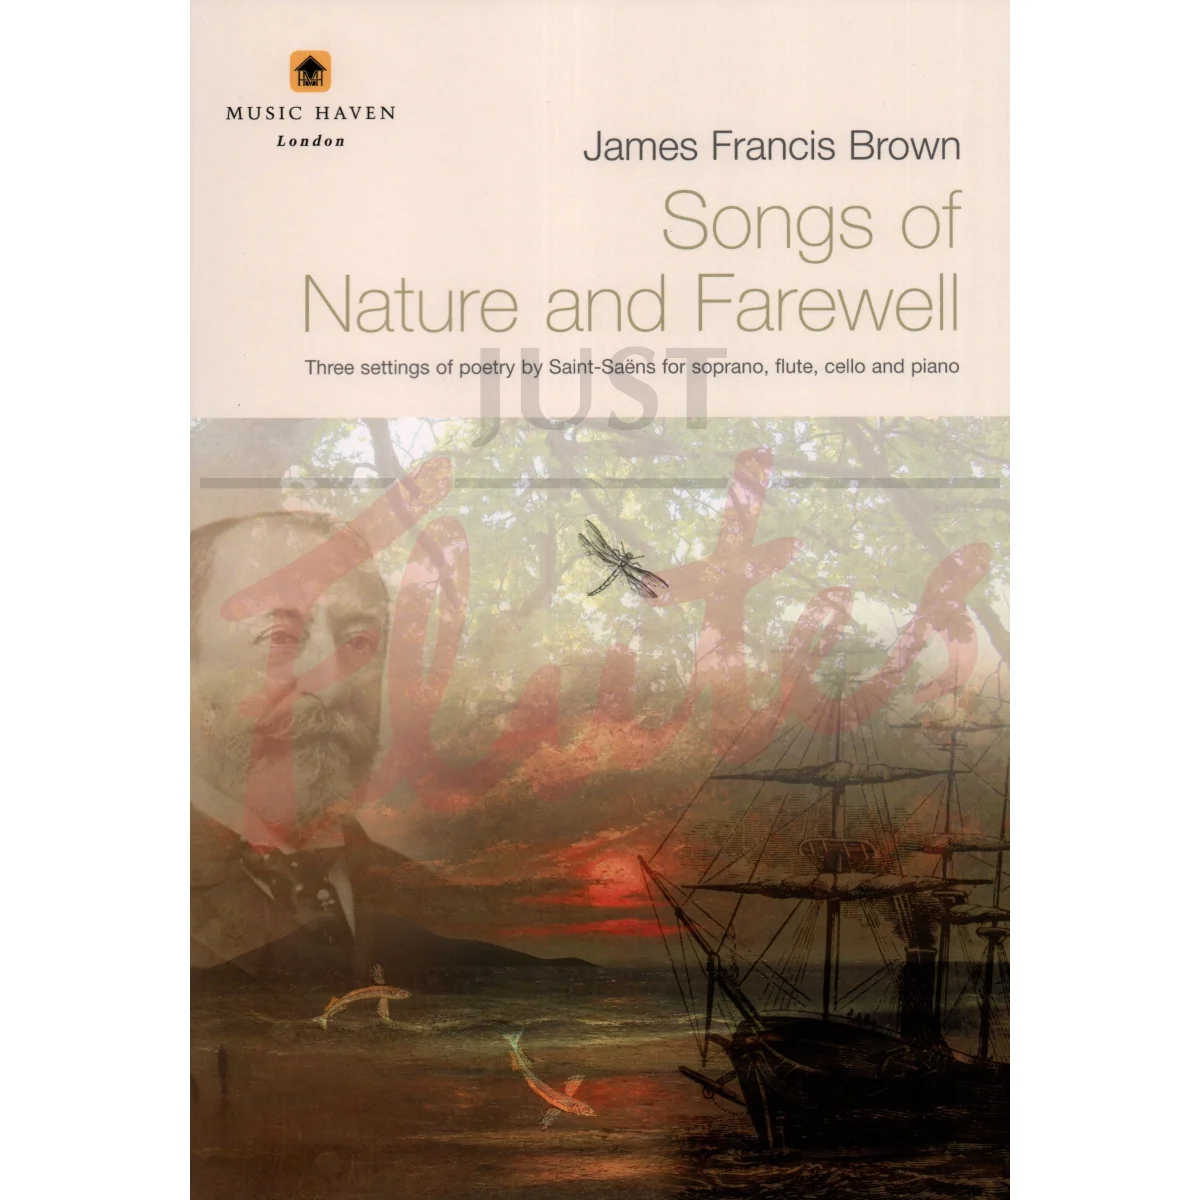 Songs of Nature and Farewell for Soprano, Flute, Cello and Piano